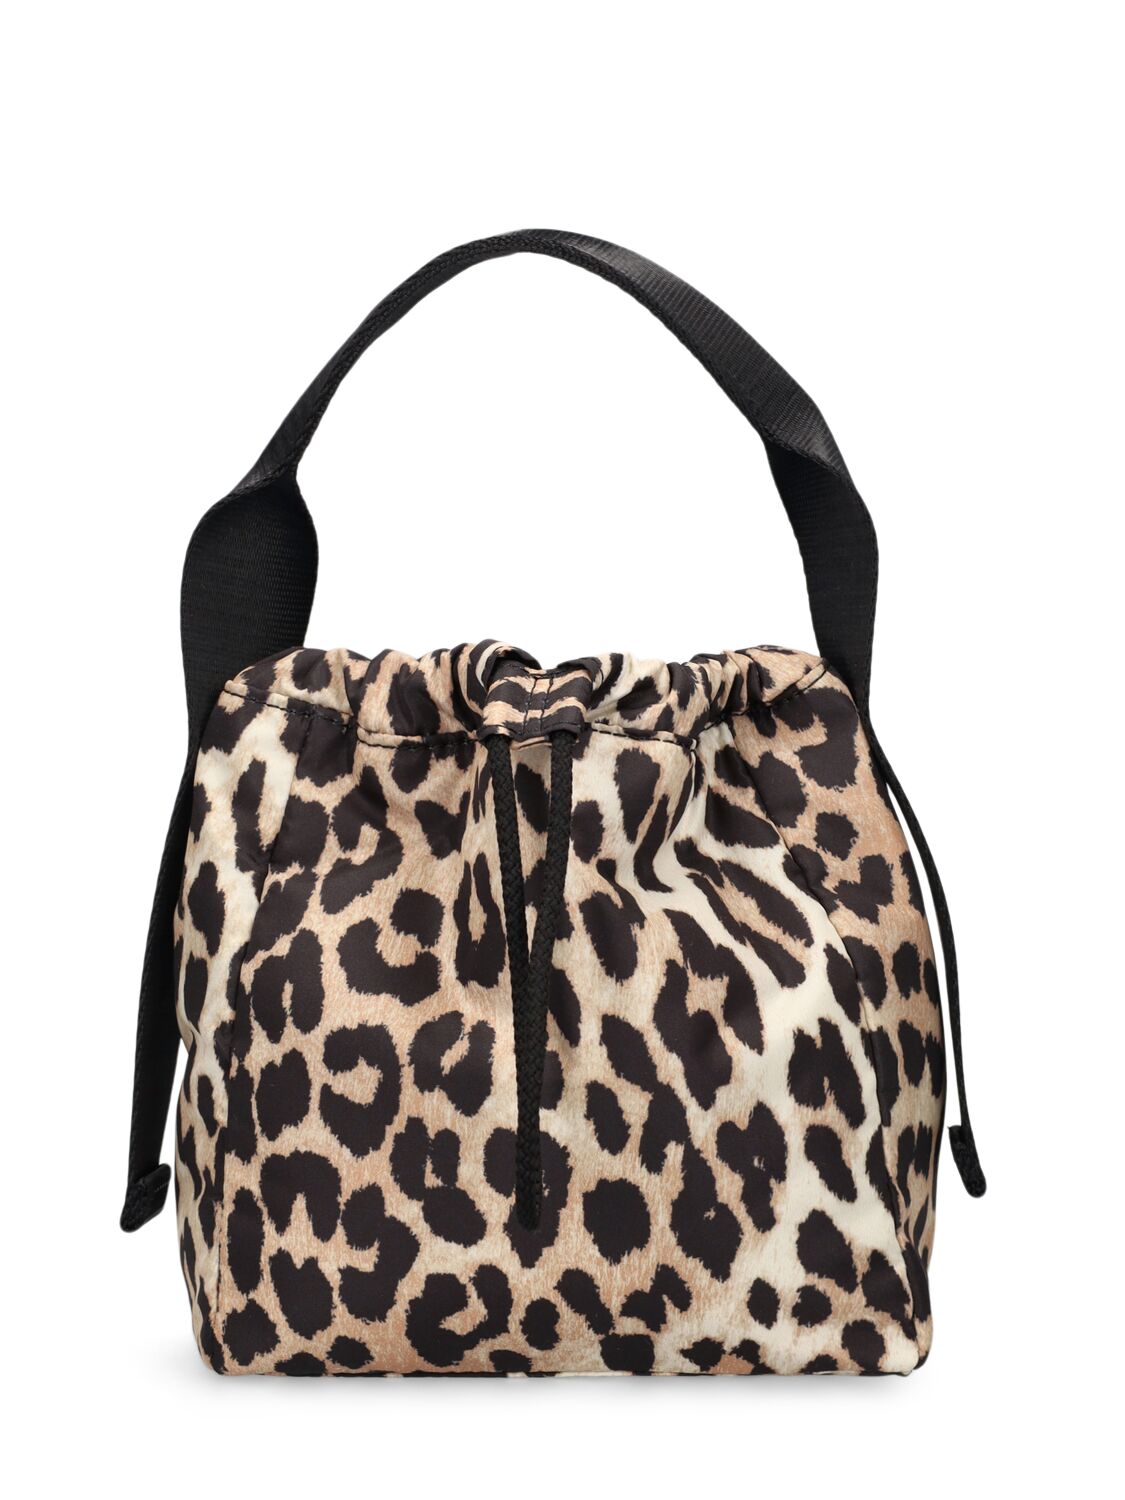 Ganni Recycled Printed Tech Top Handle Bag In Leopard